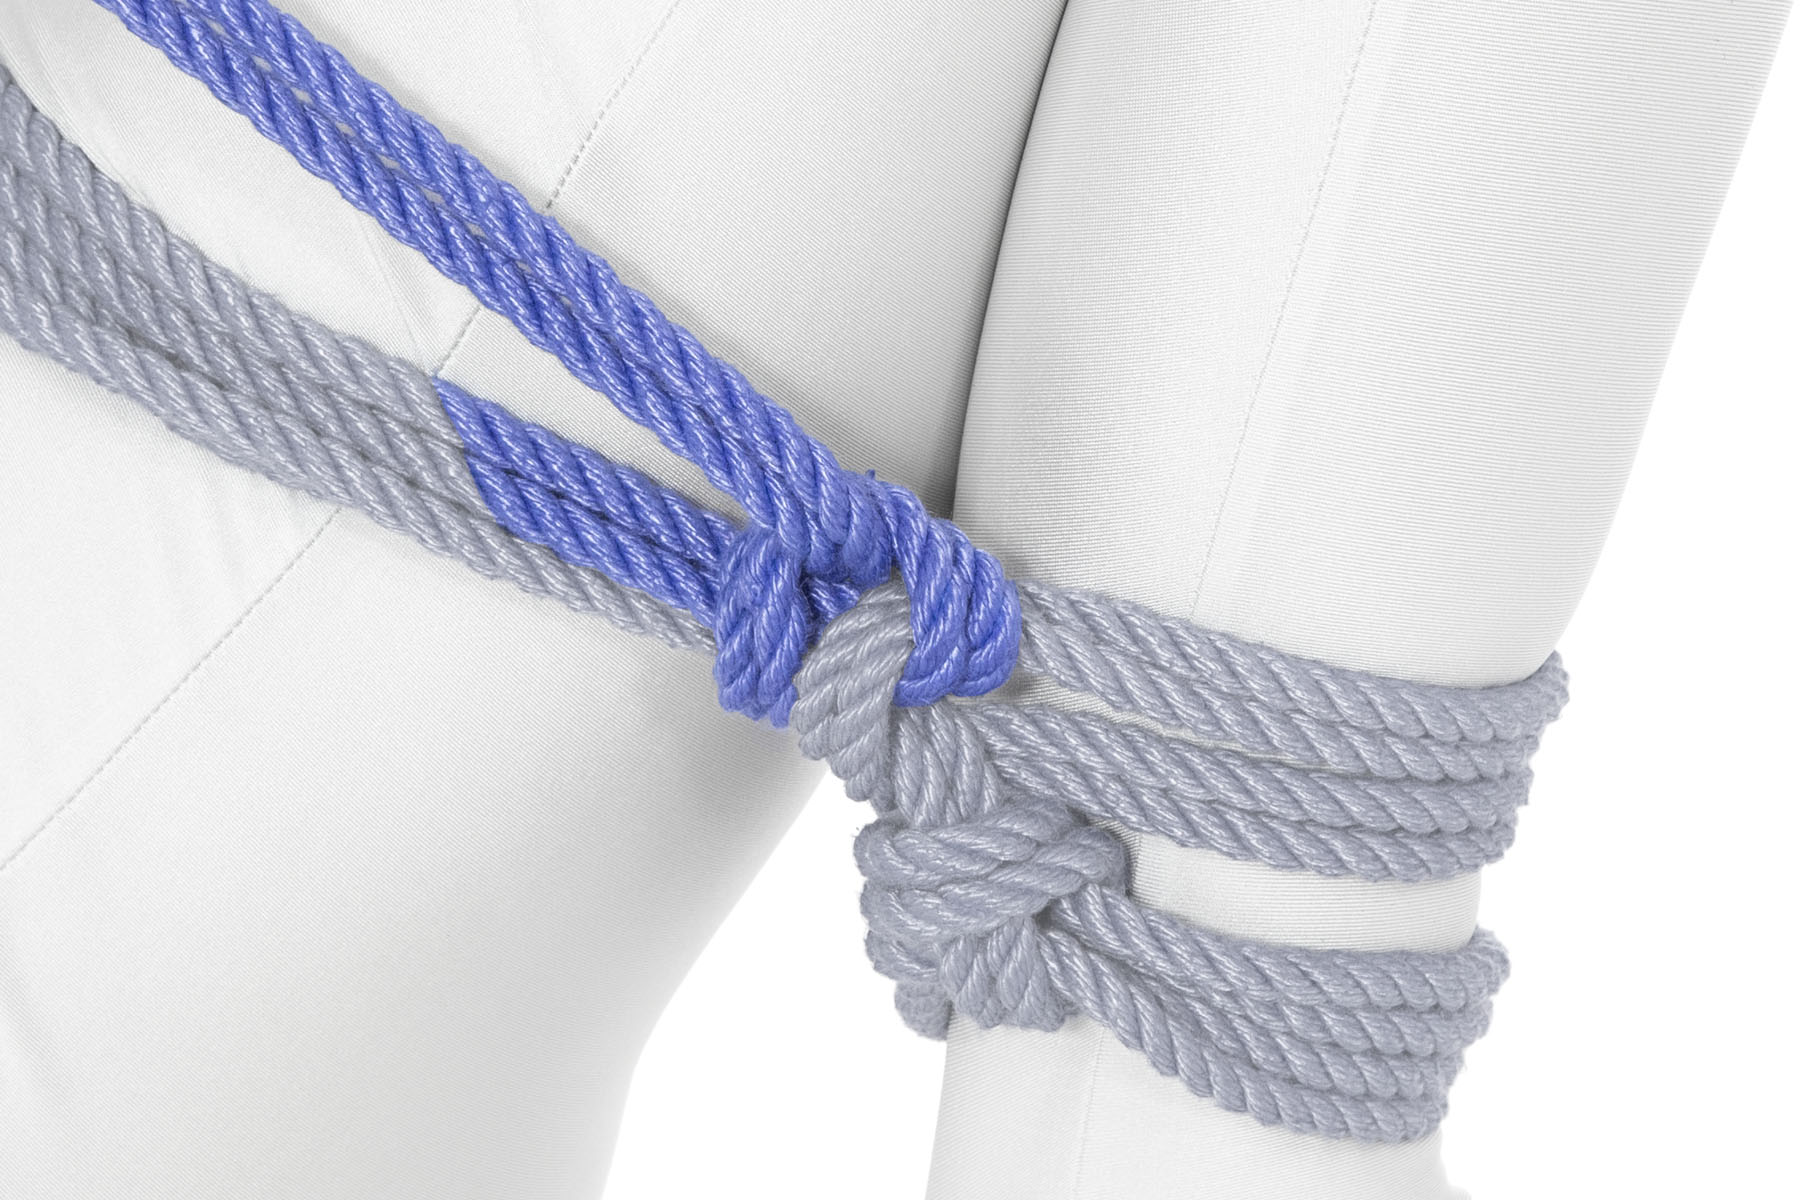 The rope goes around both wraps and through itself, making a half hitch that binds the wraps together.